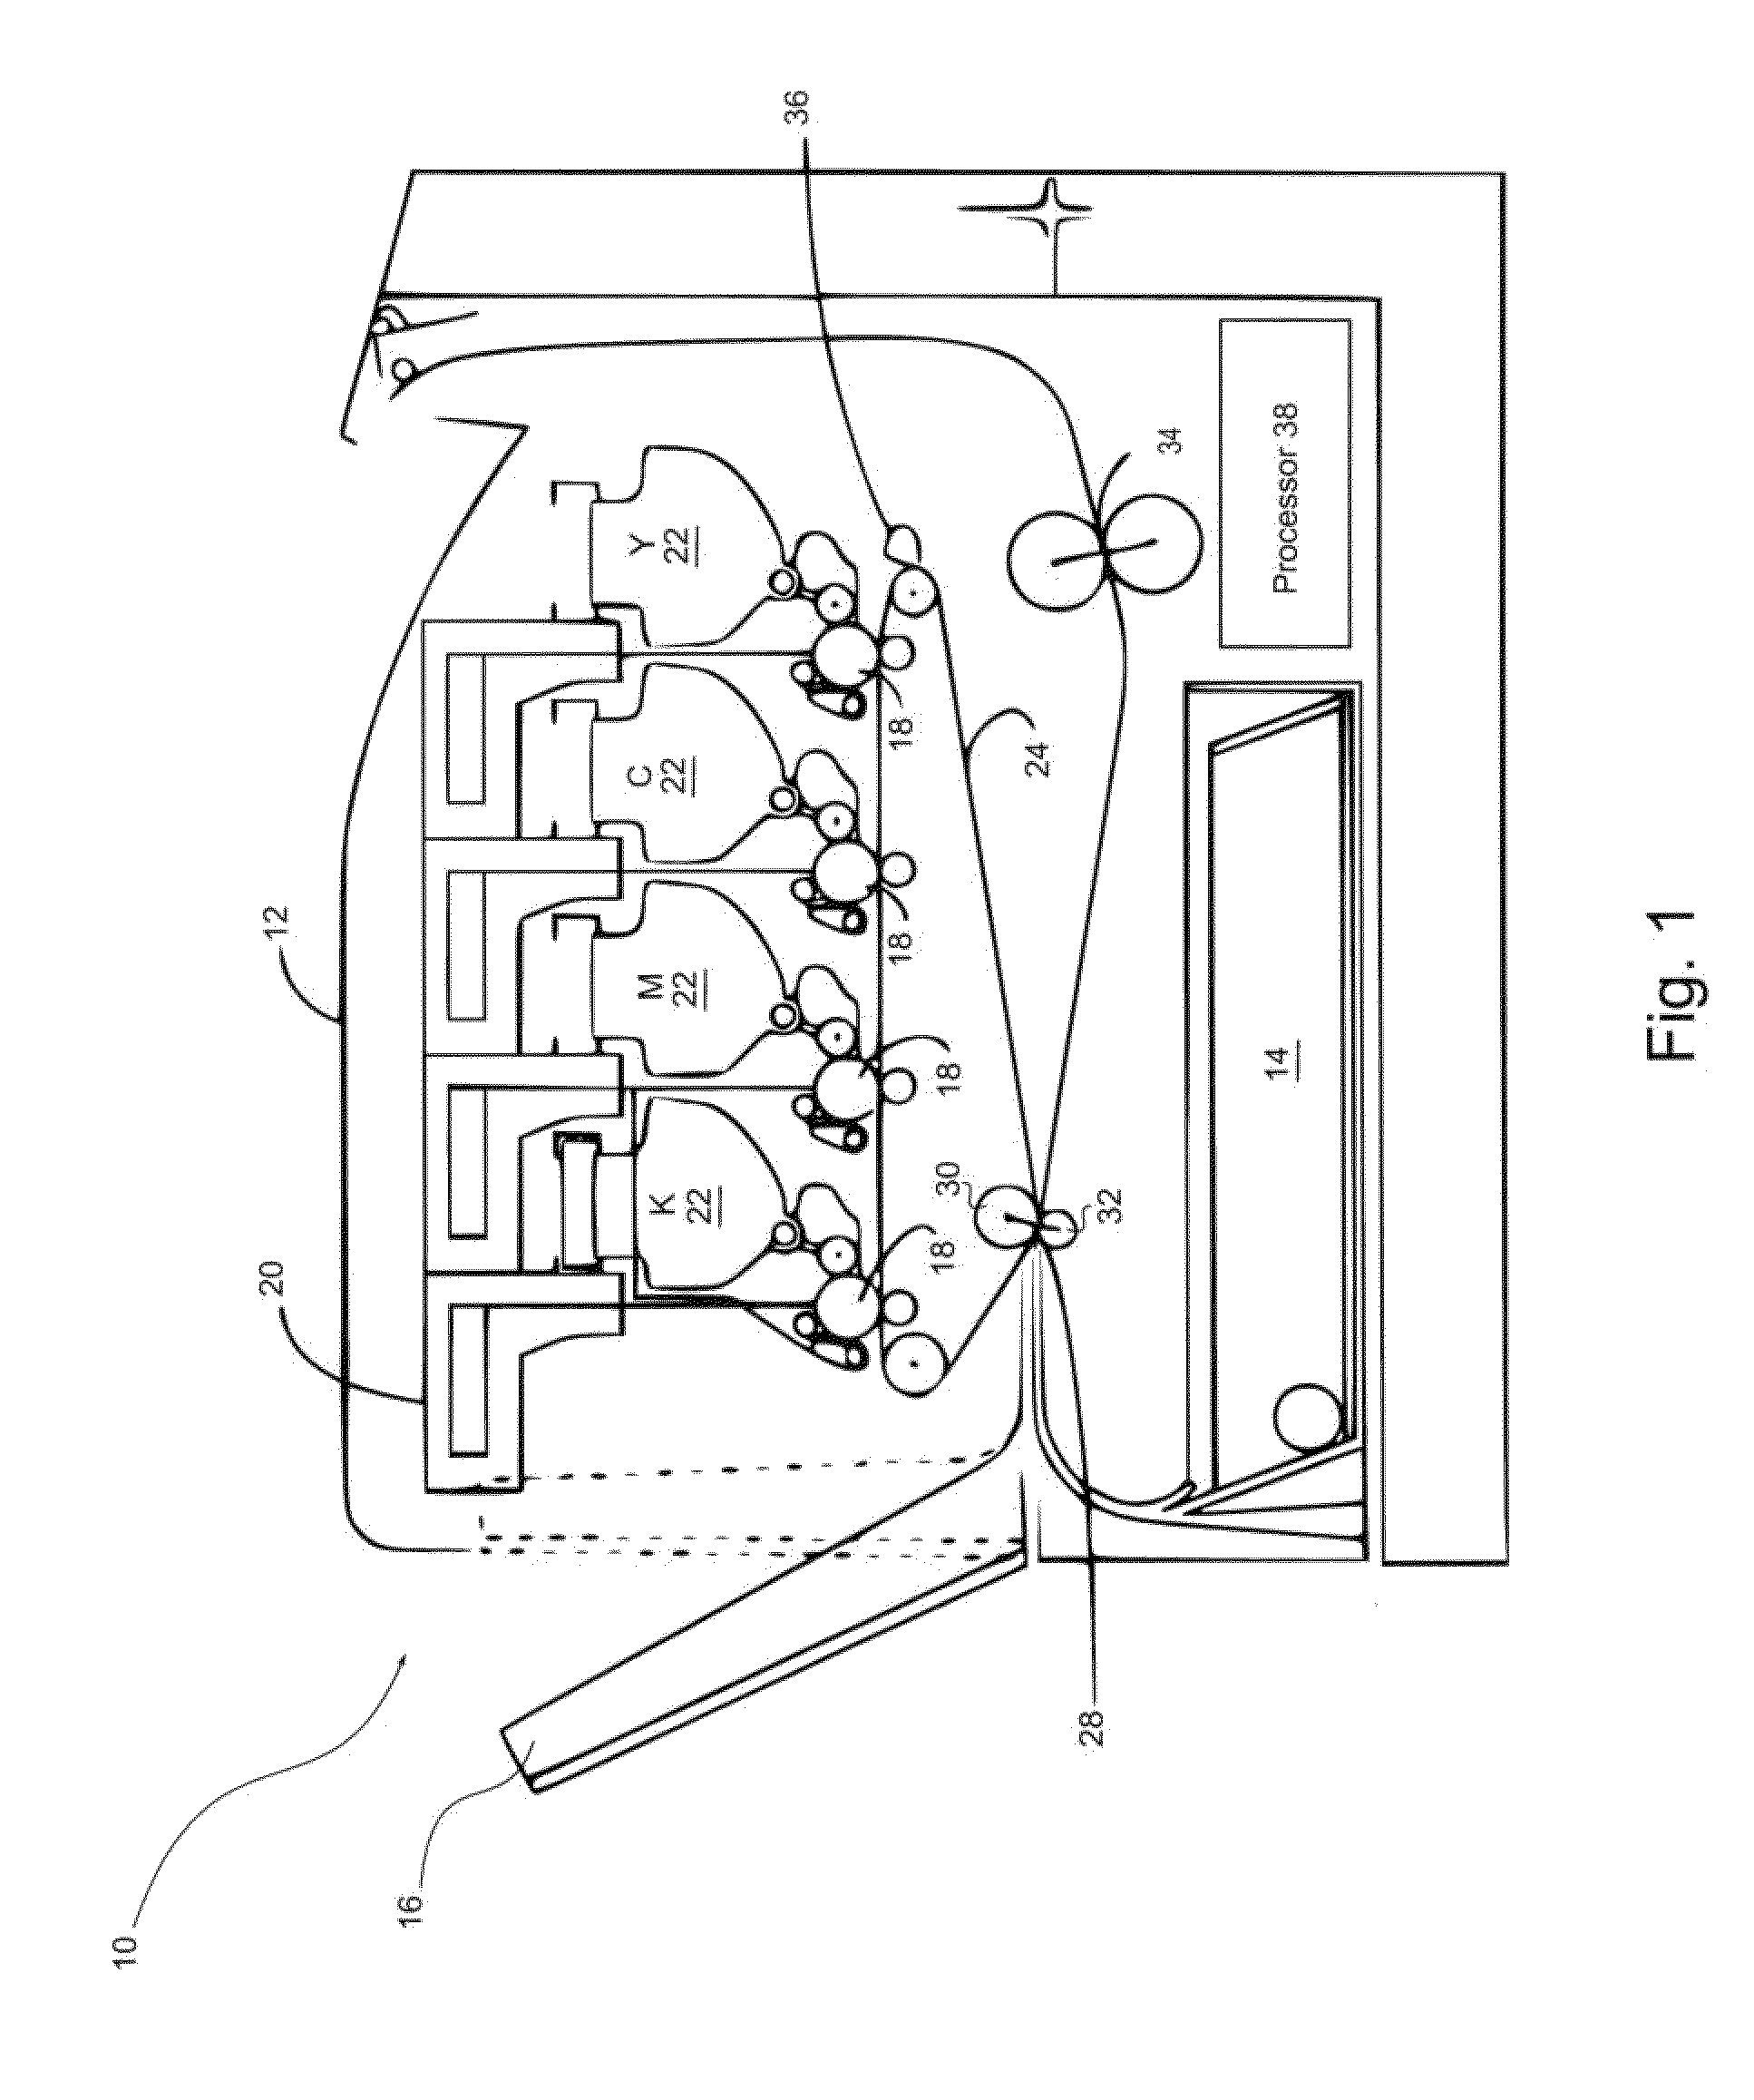 Fuser for an Image-Forming Apparatus and Method of Using Same